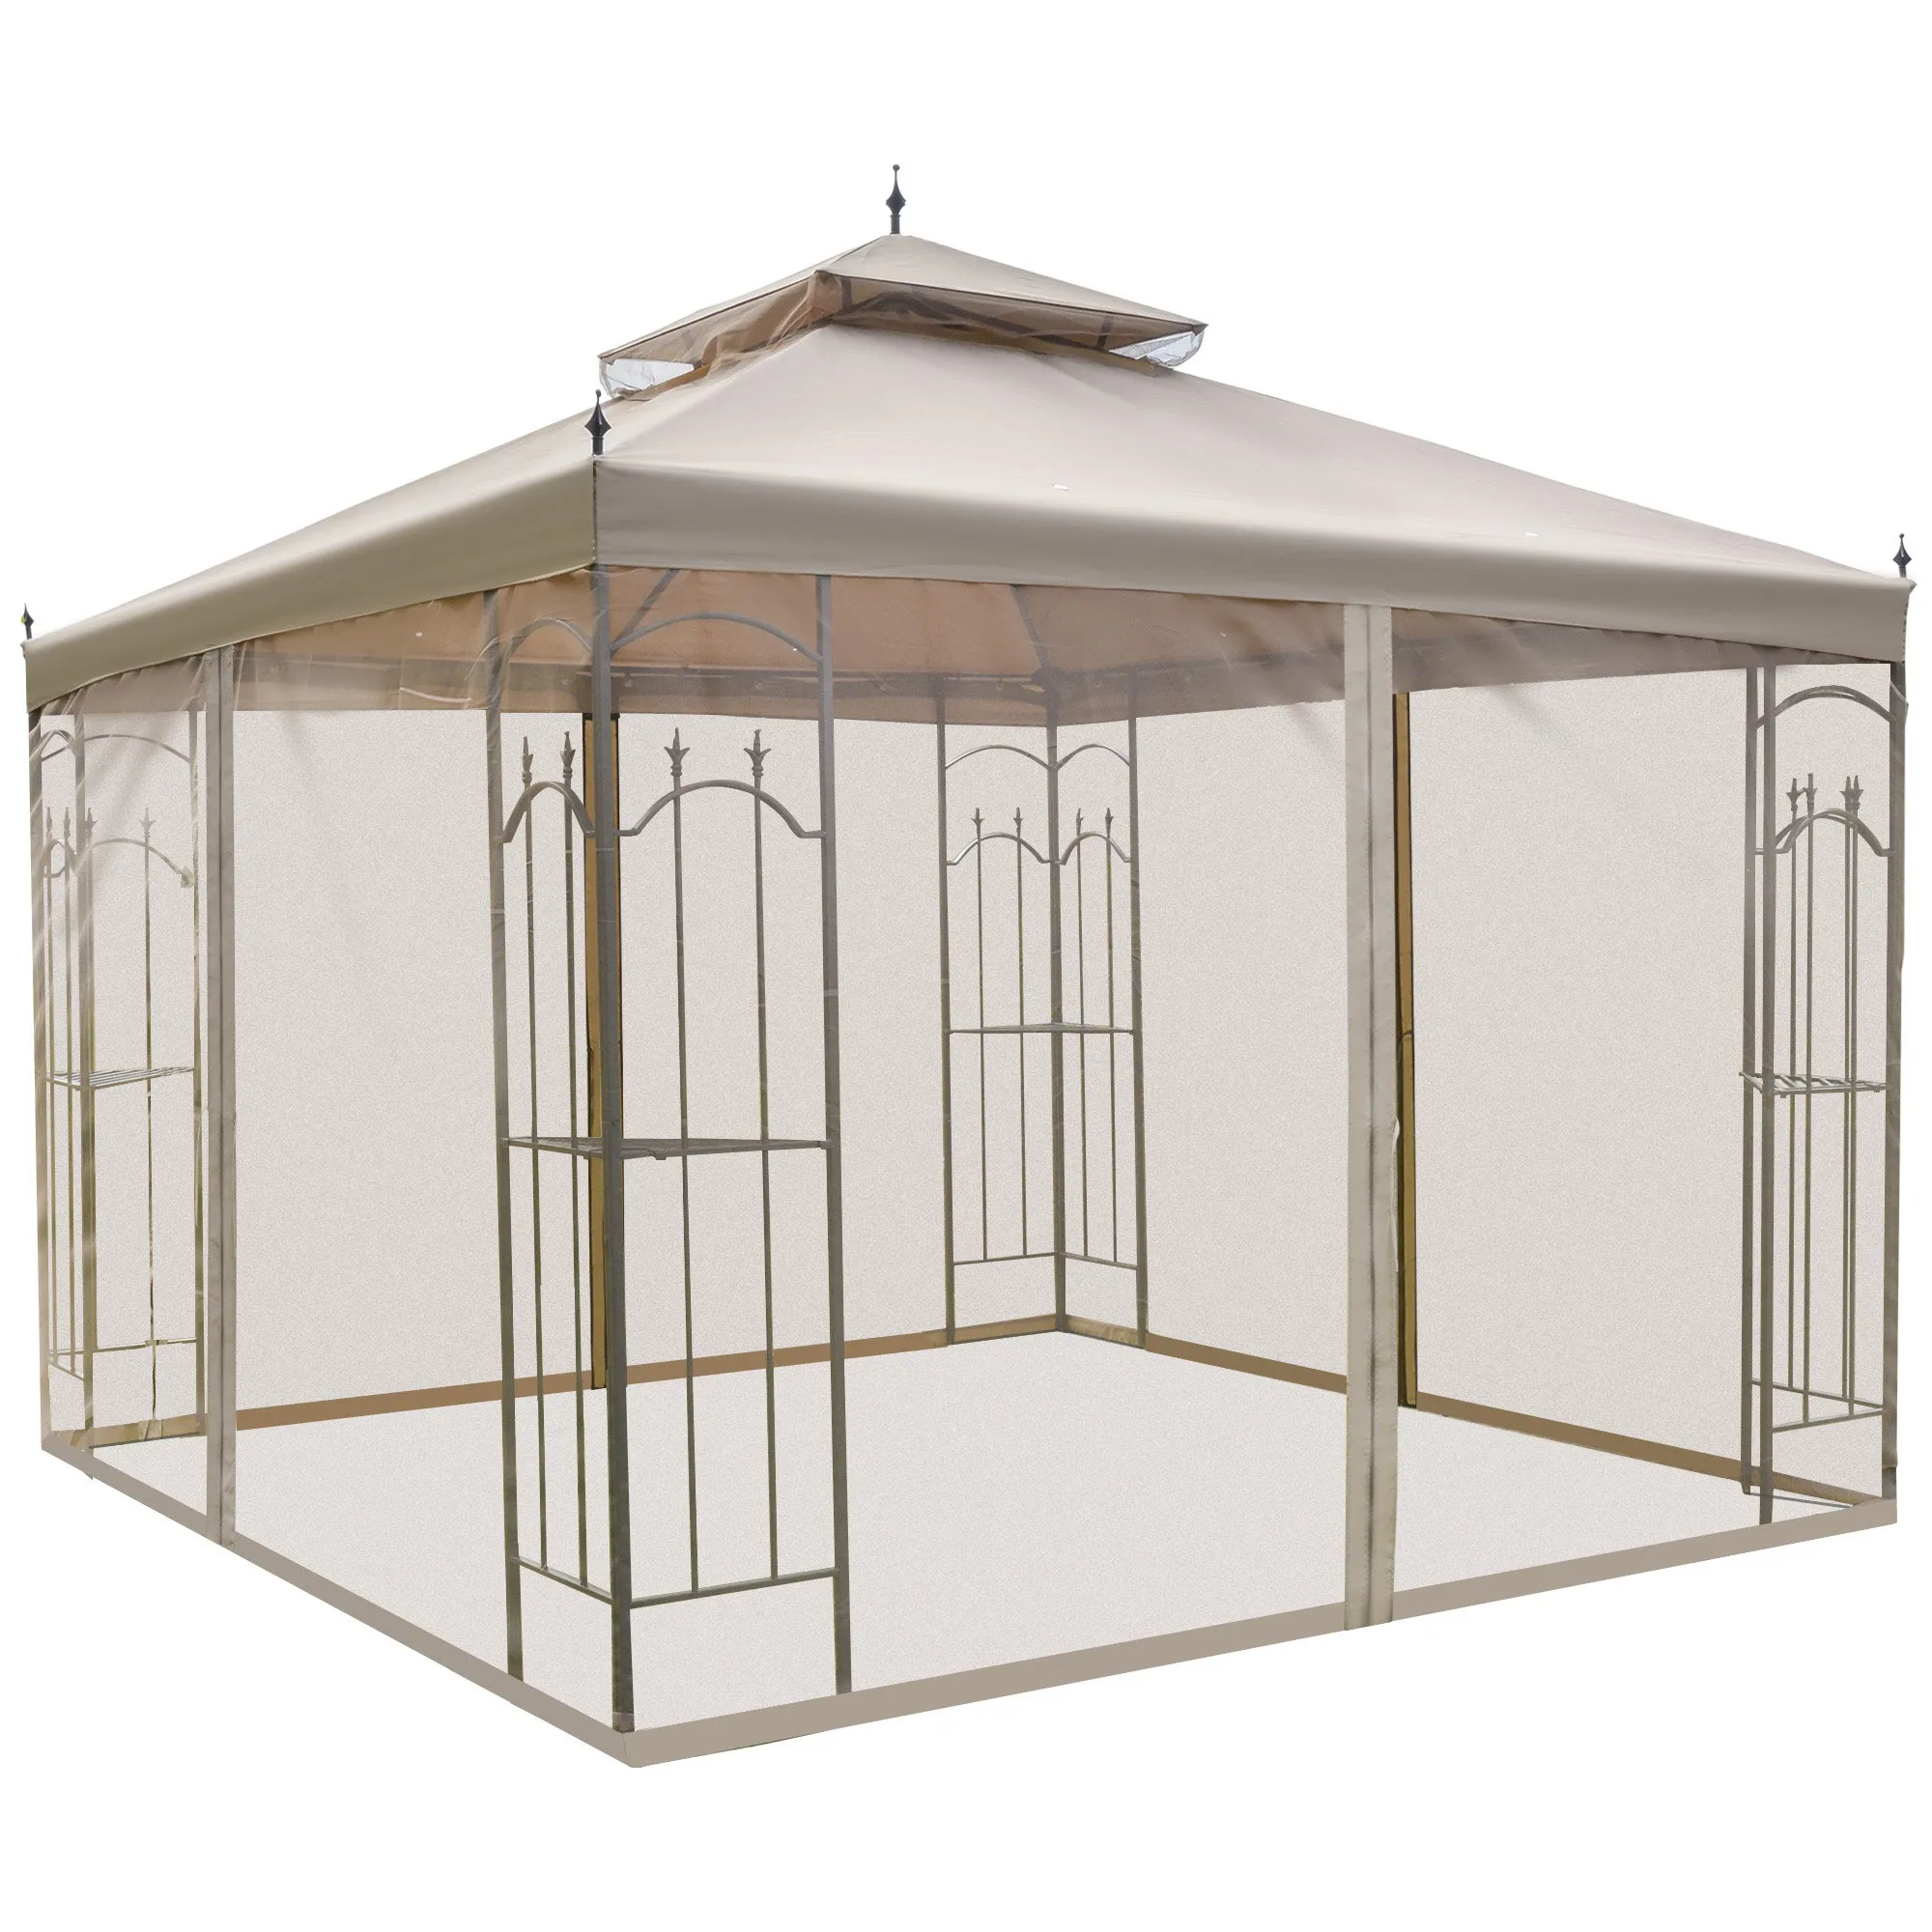 10' x 10' Steel Outdoor Patio Gazebo Canopy with Removable Mesh Curtains, Display Shelves, & Steel Frame, Brown